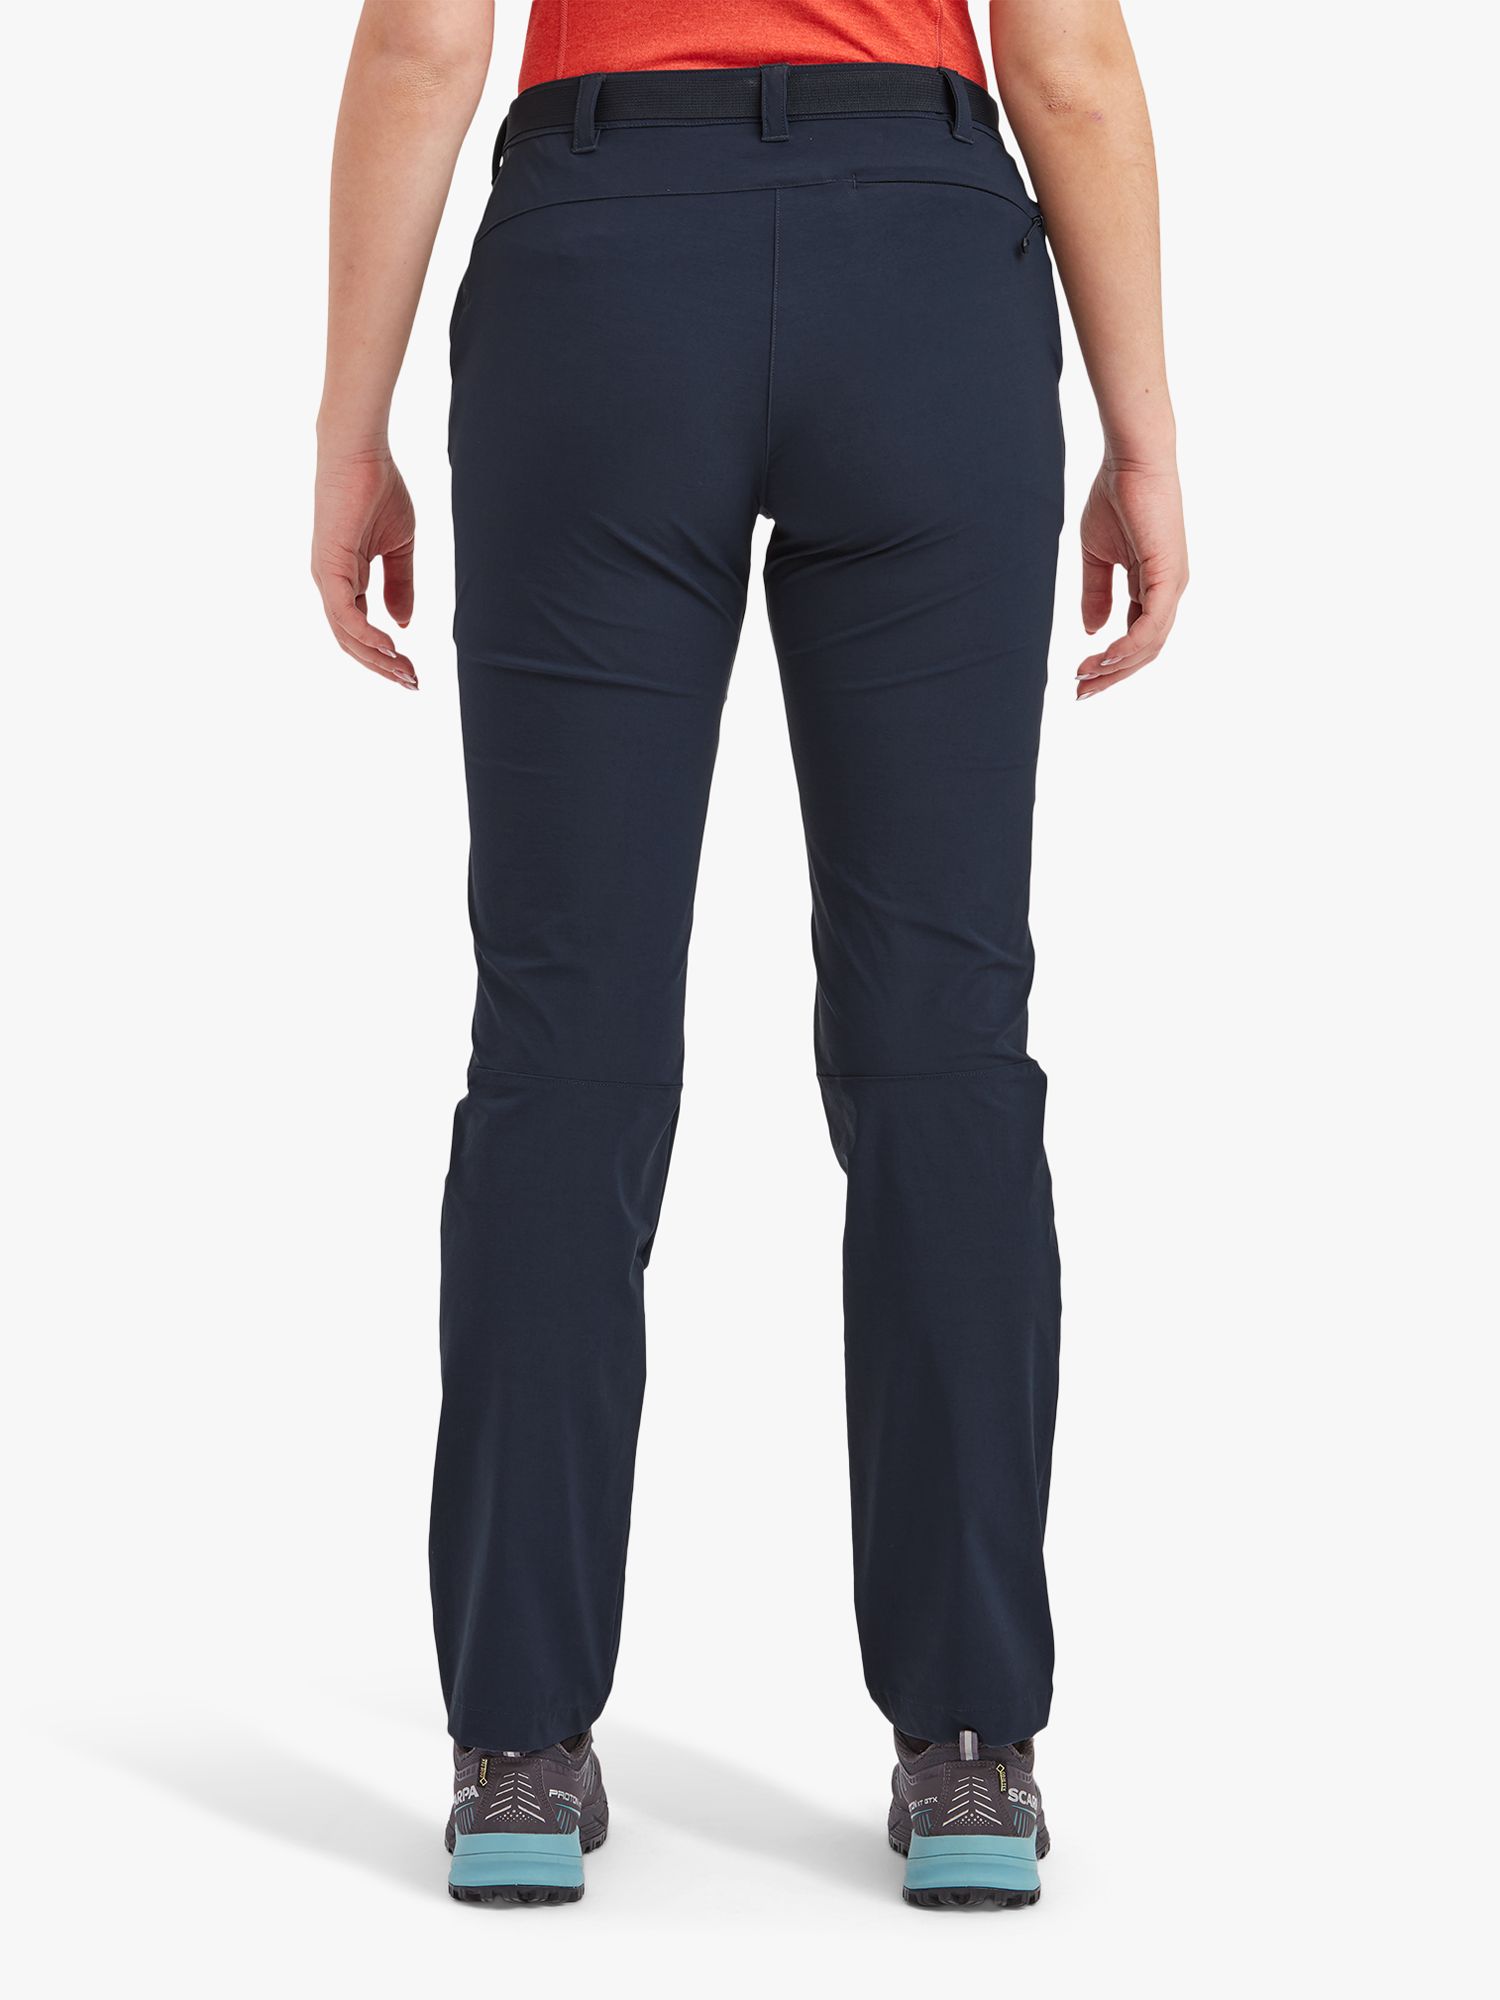 Buy Montane Terra Lite Stretch Trousers Online at johnlewis.com